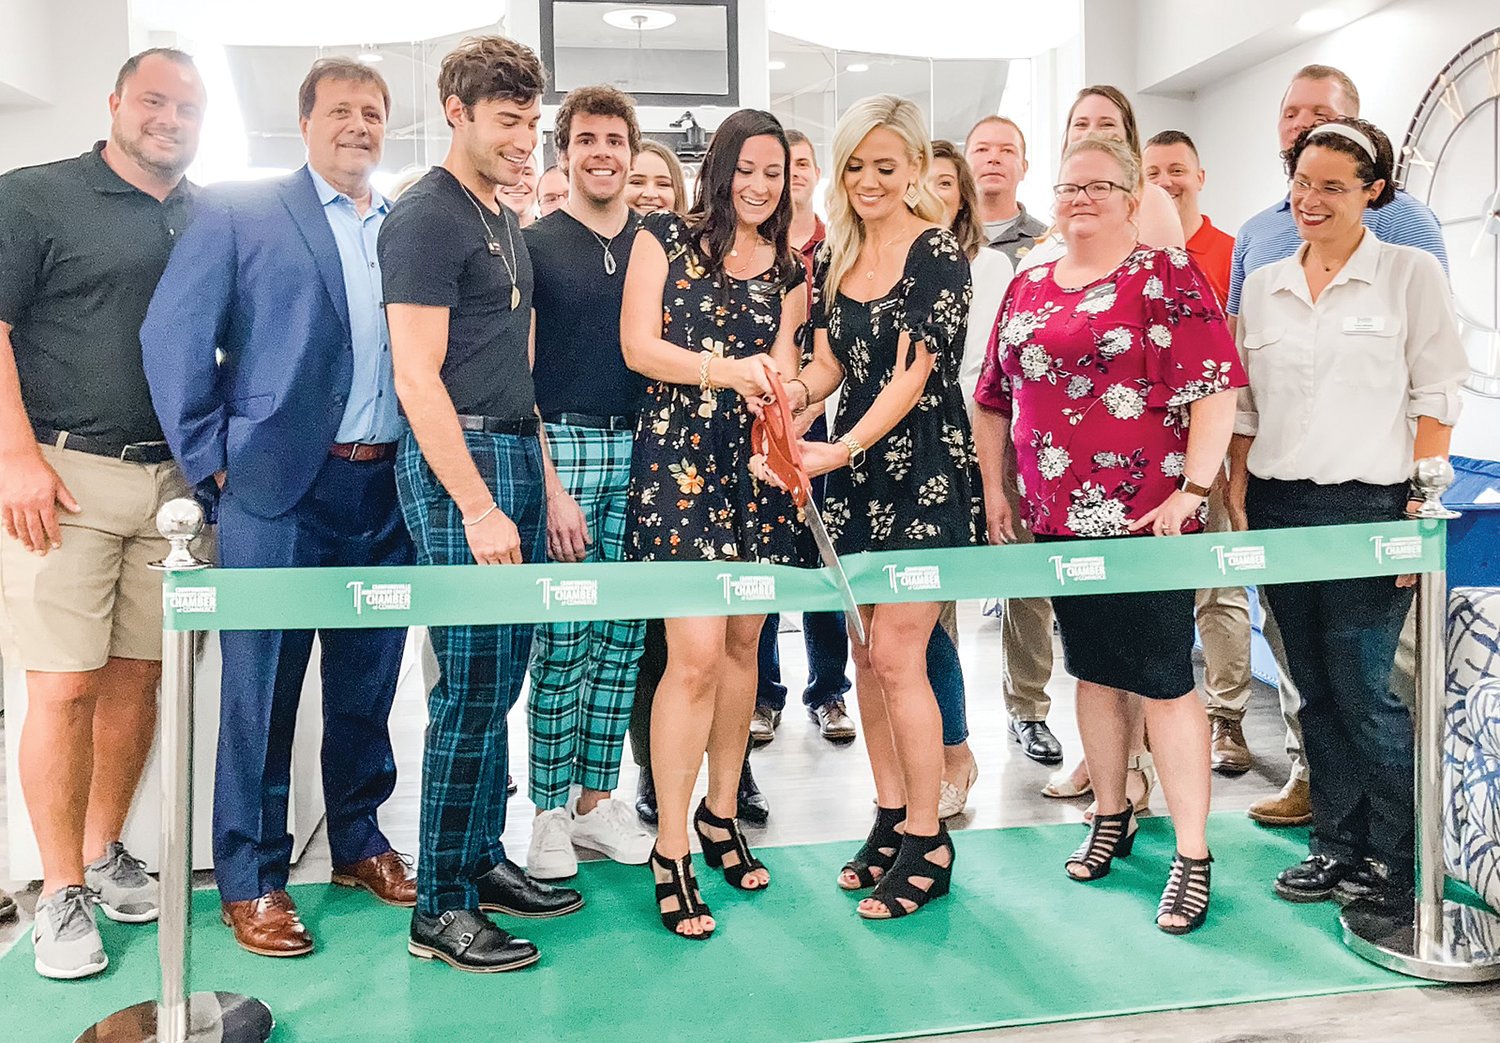 Kasey Ferguson and Rachel Artz cut a ribbon during the grand opening ceremony and open house for Hive Realty Group, 111 N. Washington St. Also pictured are agents, Greg Keyler, Doug Pillow, Jade Perry, Xavier Yankey, Taylor Nine, Ashlee Pritchett, Paige Hewitt, Melanie Thurston and Clark Dale.